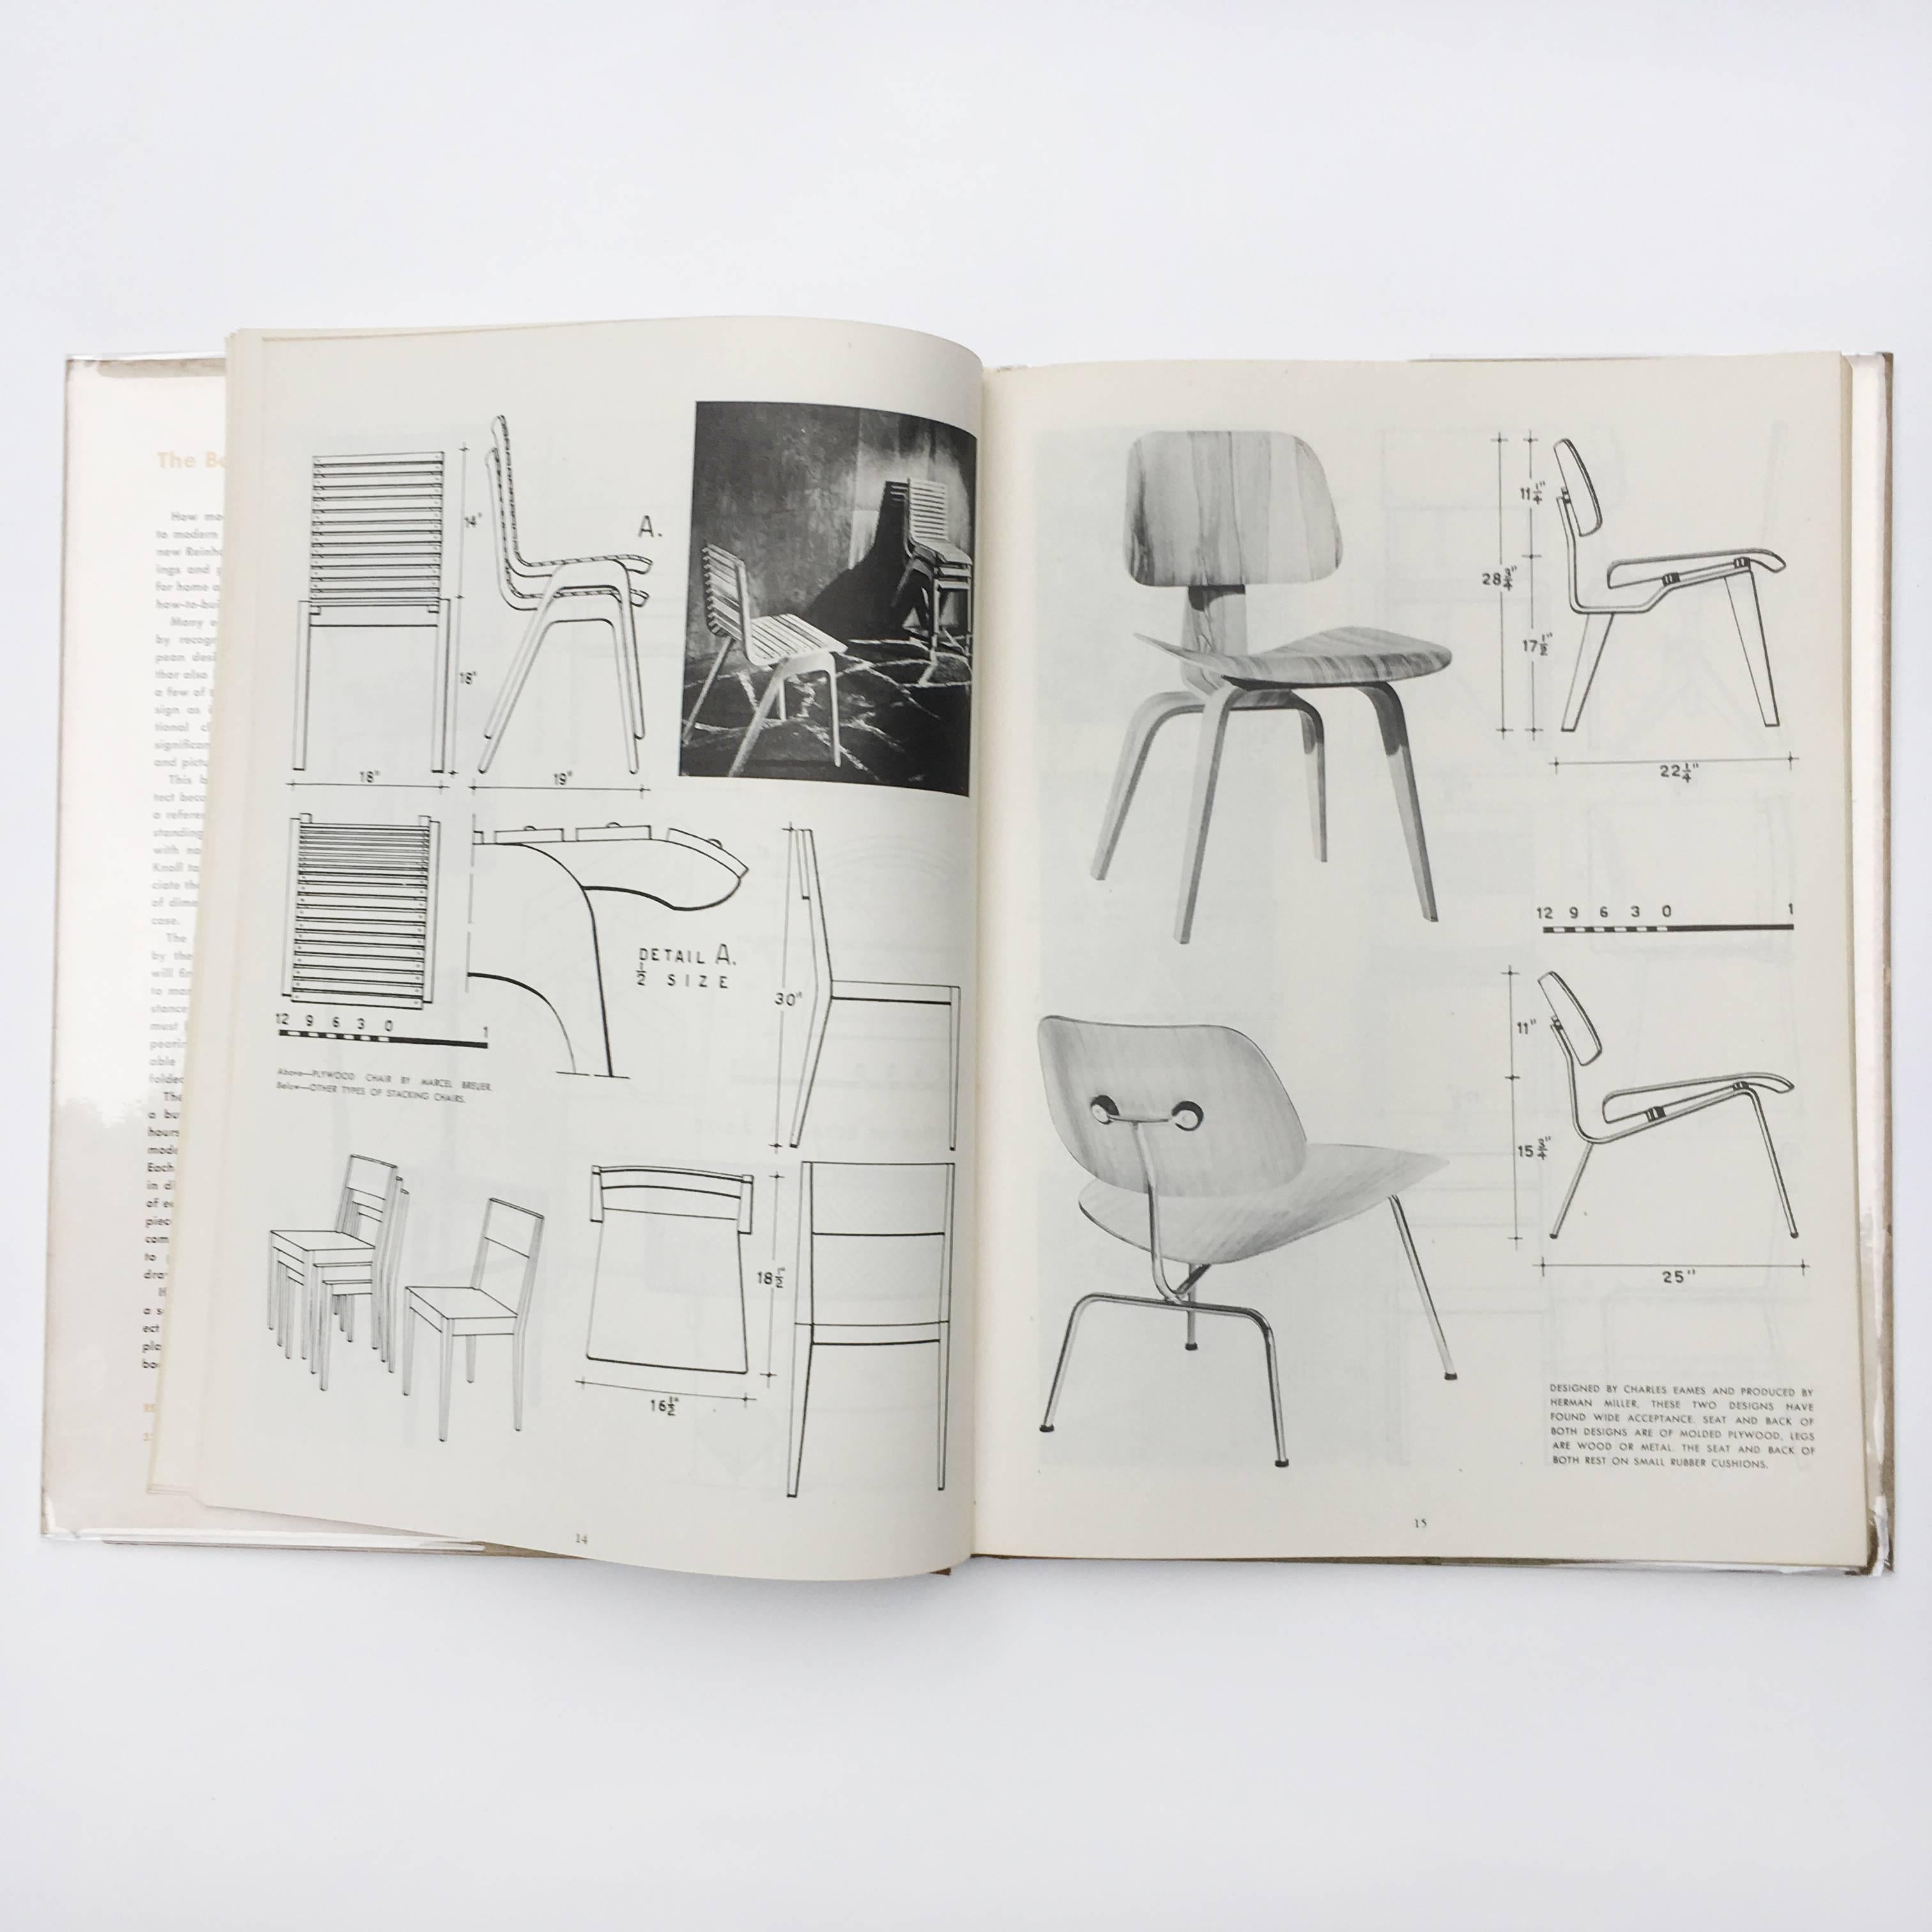 First edition, second printing, published by Reinhold Publishing Corporation, 1950.

A guide to the design and production of modern furniture, published contemporary to the era. With annotated line drawings and black and white photographs, the